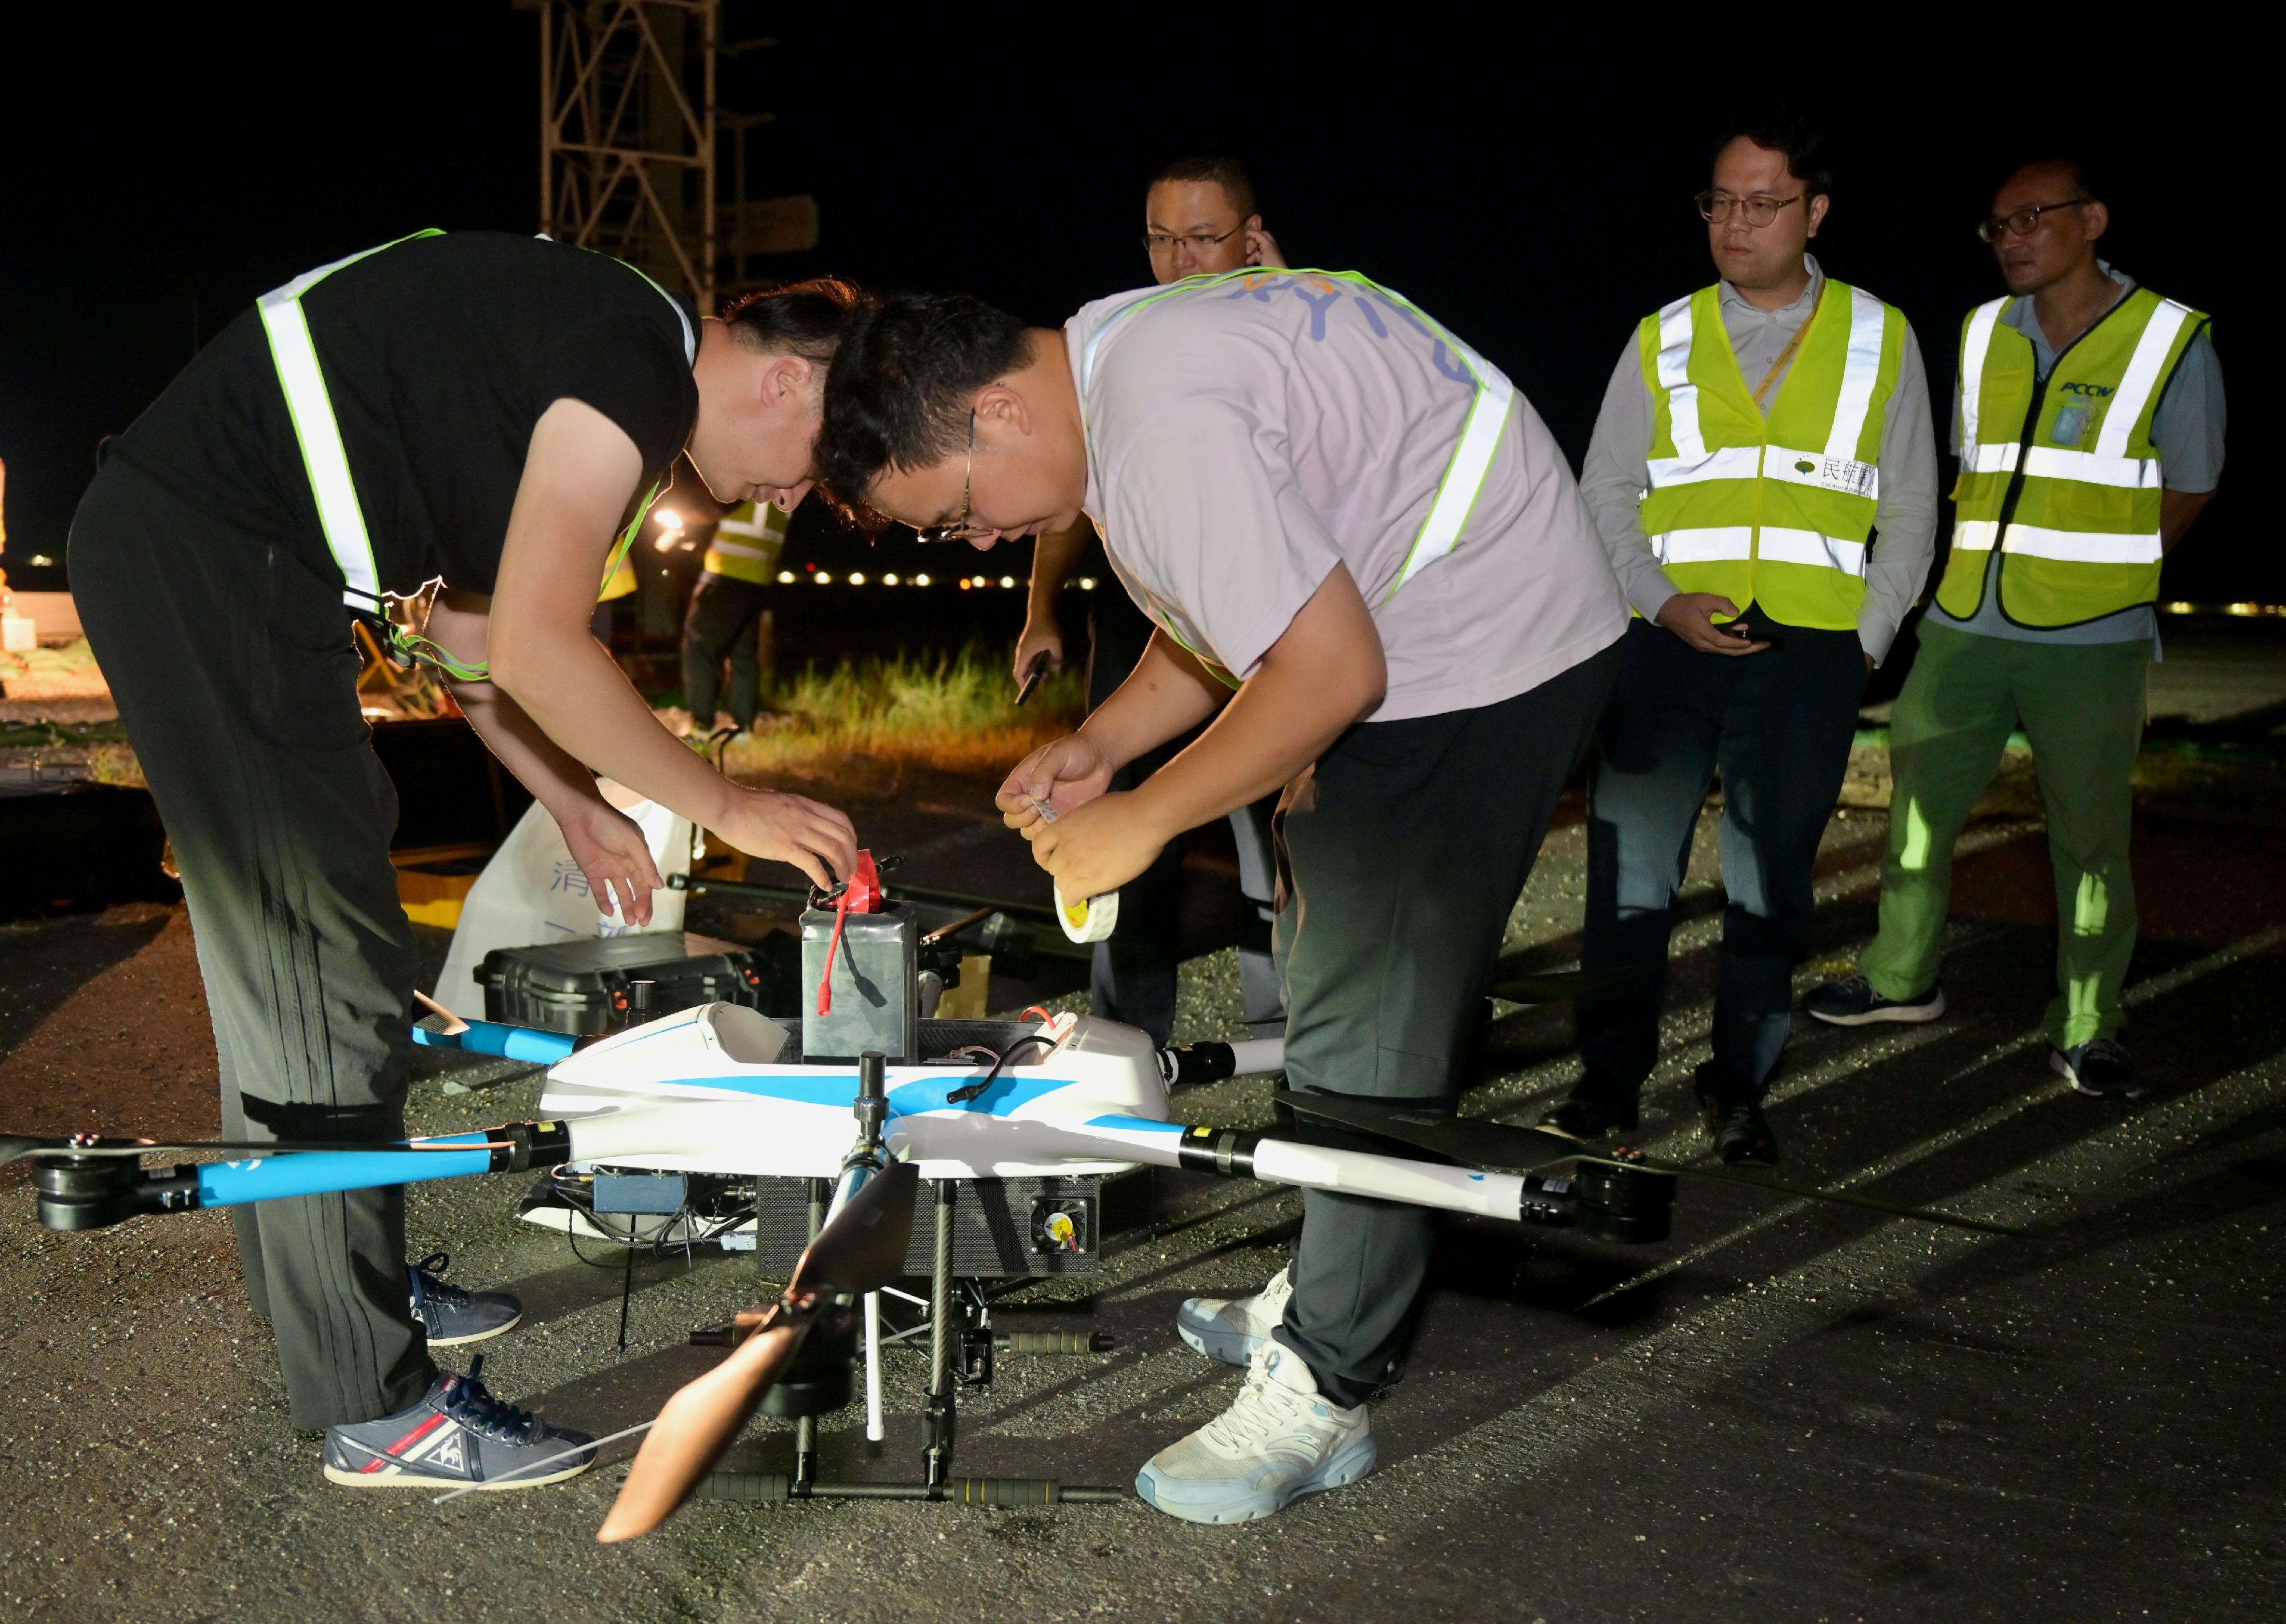 The Civil Aviation Department (CAD) today (August 20) conducted a trial flight inspection by small unmanned aircraft at Hong Kong International Airport. Photo shows experts from the CAD and the Civil Aviation Administration of China Flight Inspection Center, and relevant technical personnel preparing for the trial.